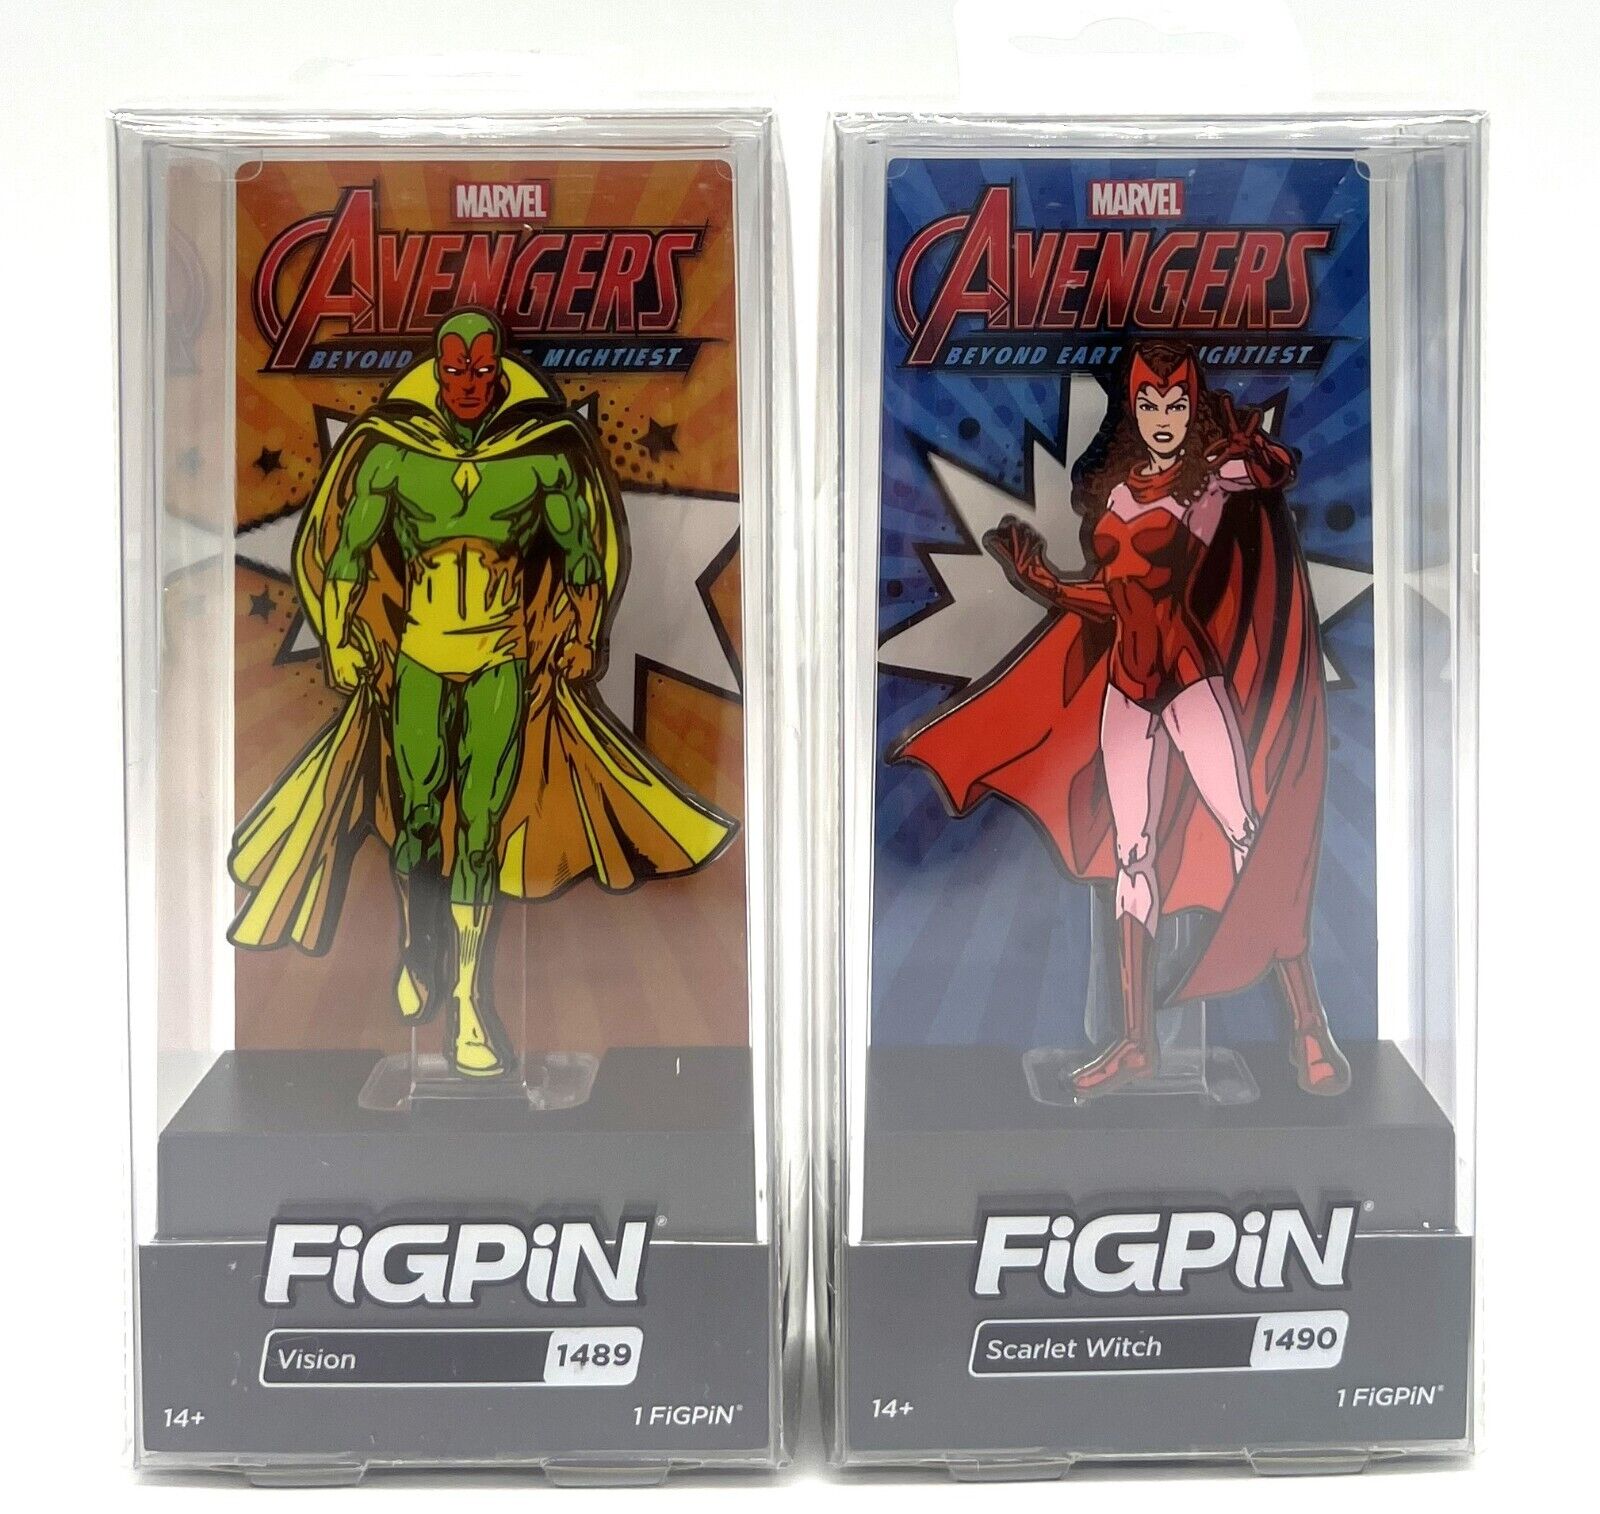 FiGPiN Marvel Avengers Vision #1489 & Scarlet Witch #1490 NYCC 23 Plastic Empire